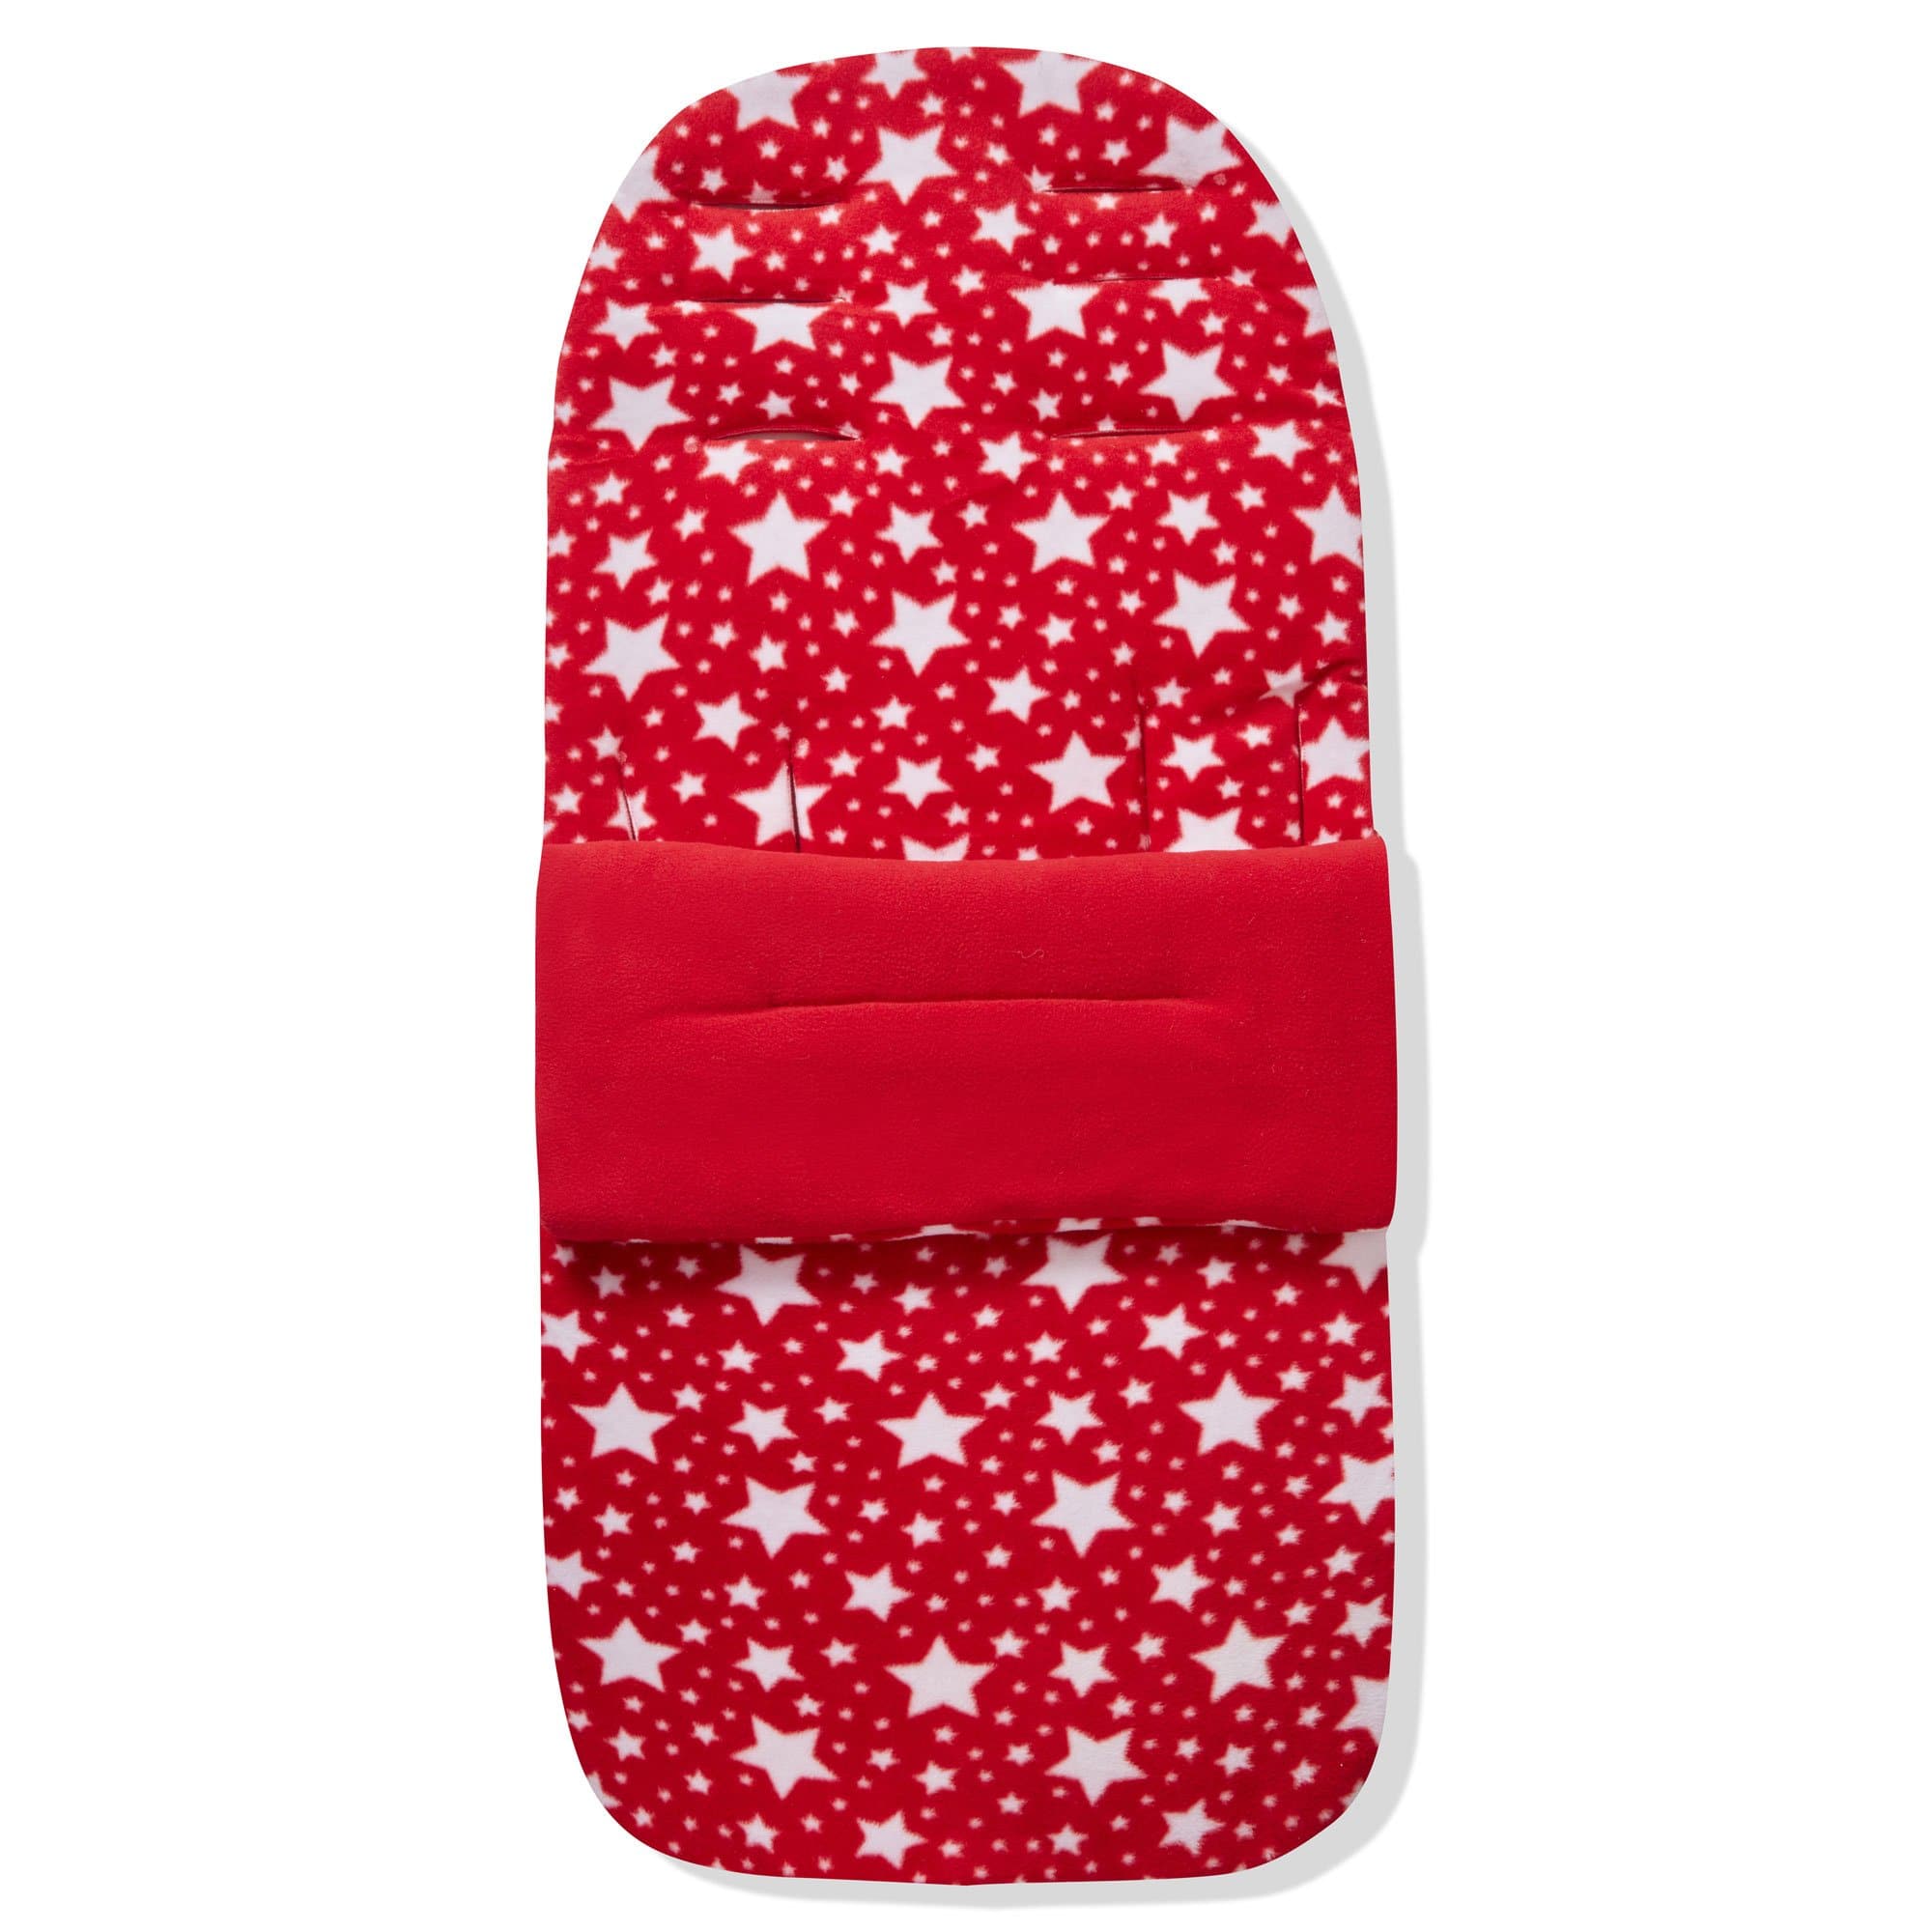 Fleece Footmuff / Cosy Toes Compatible with Uppababy - For Your Little One